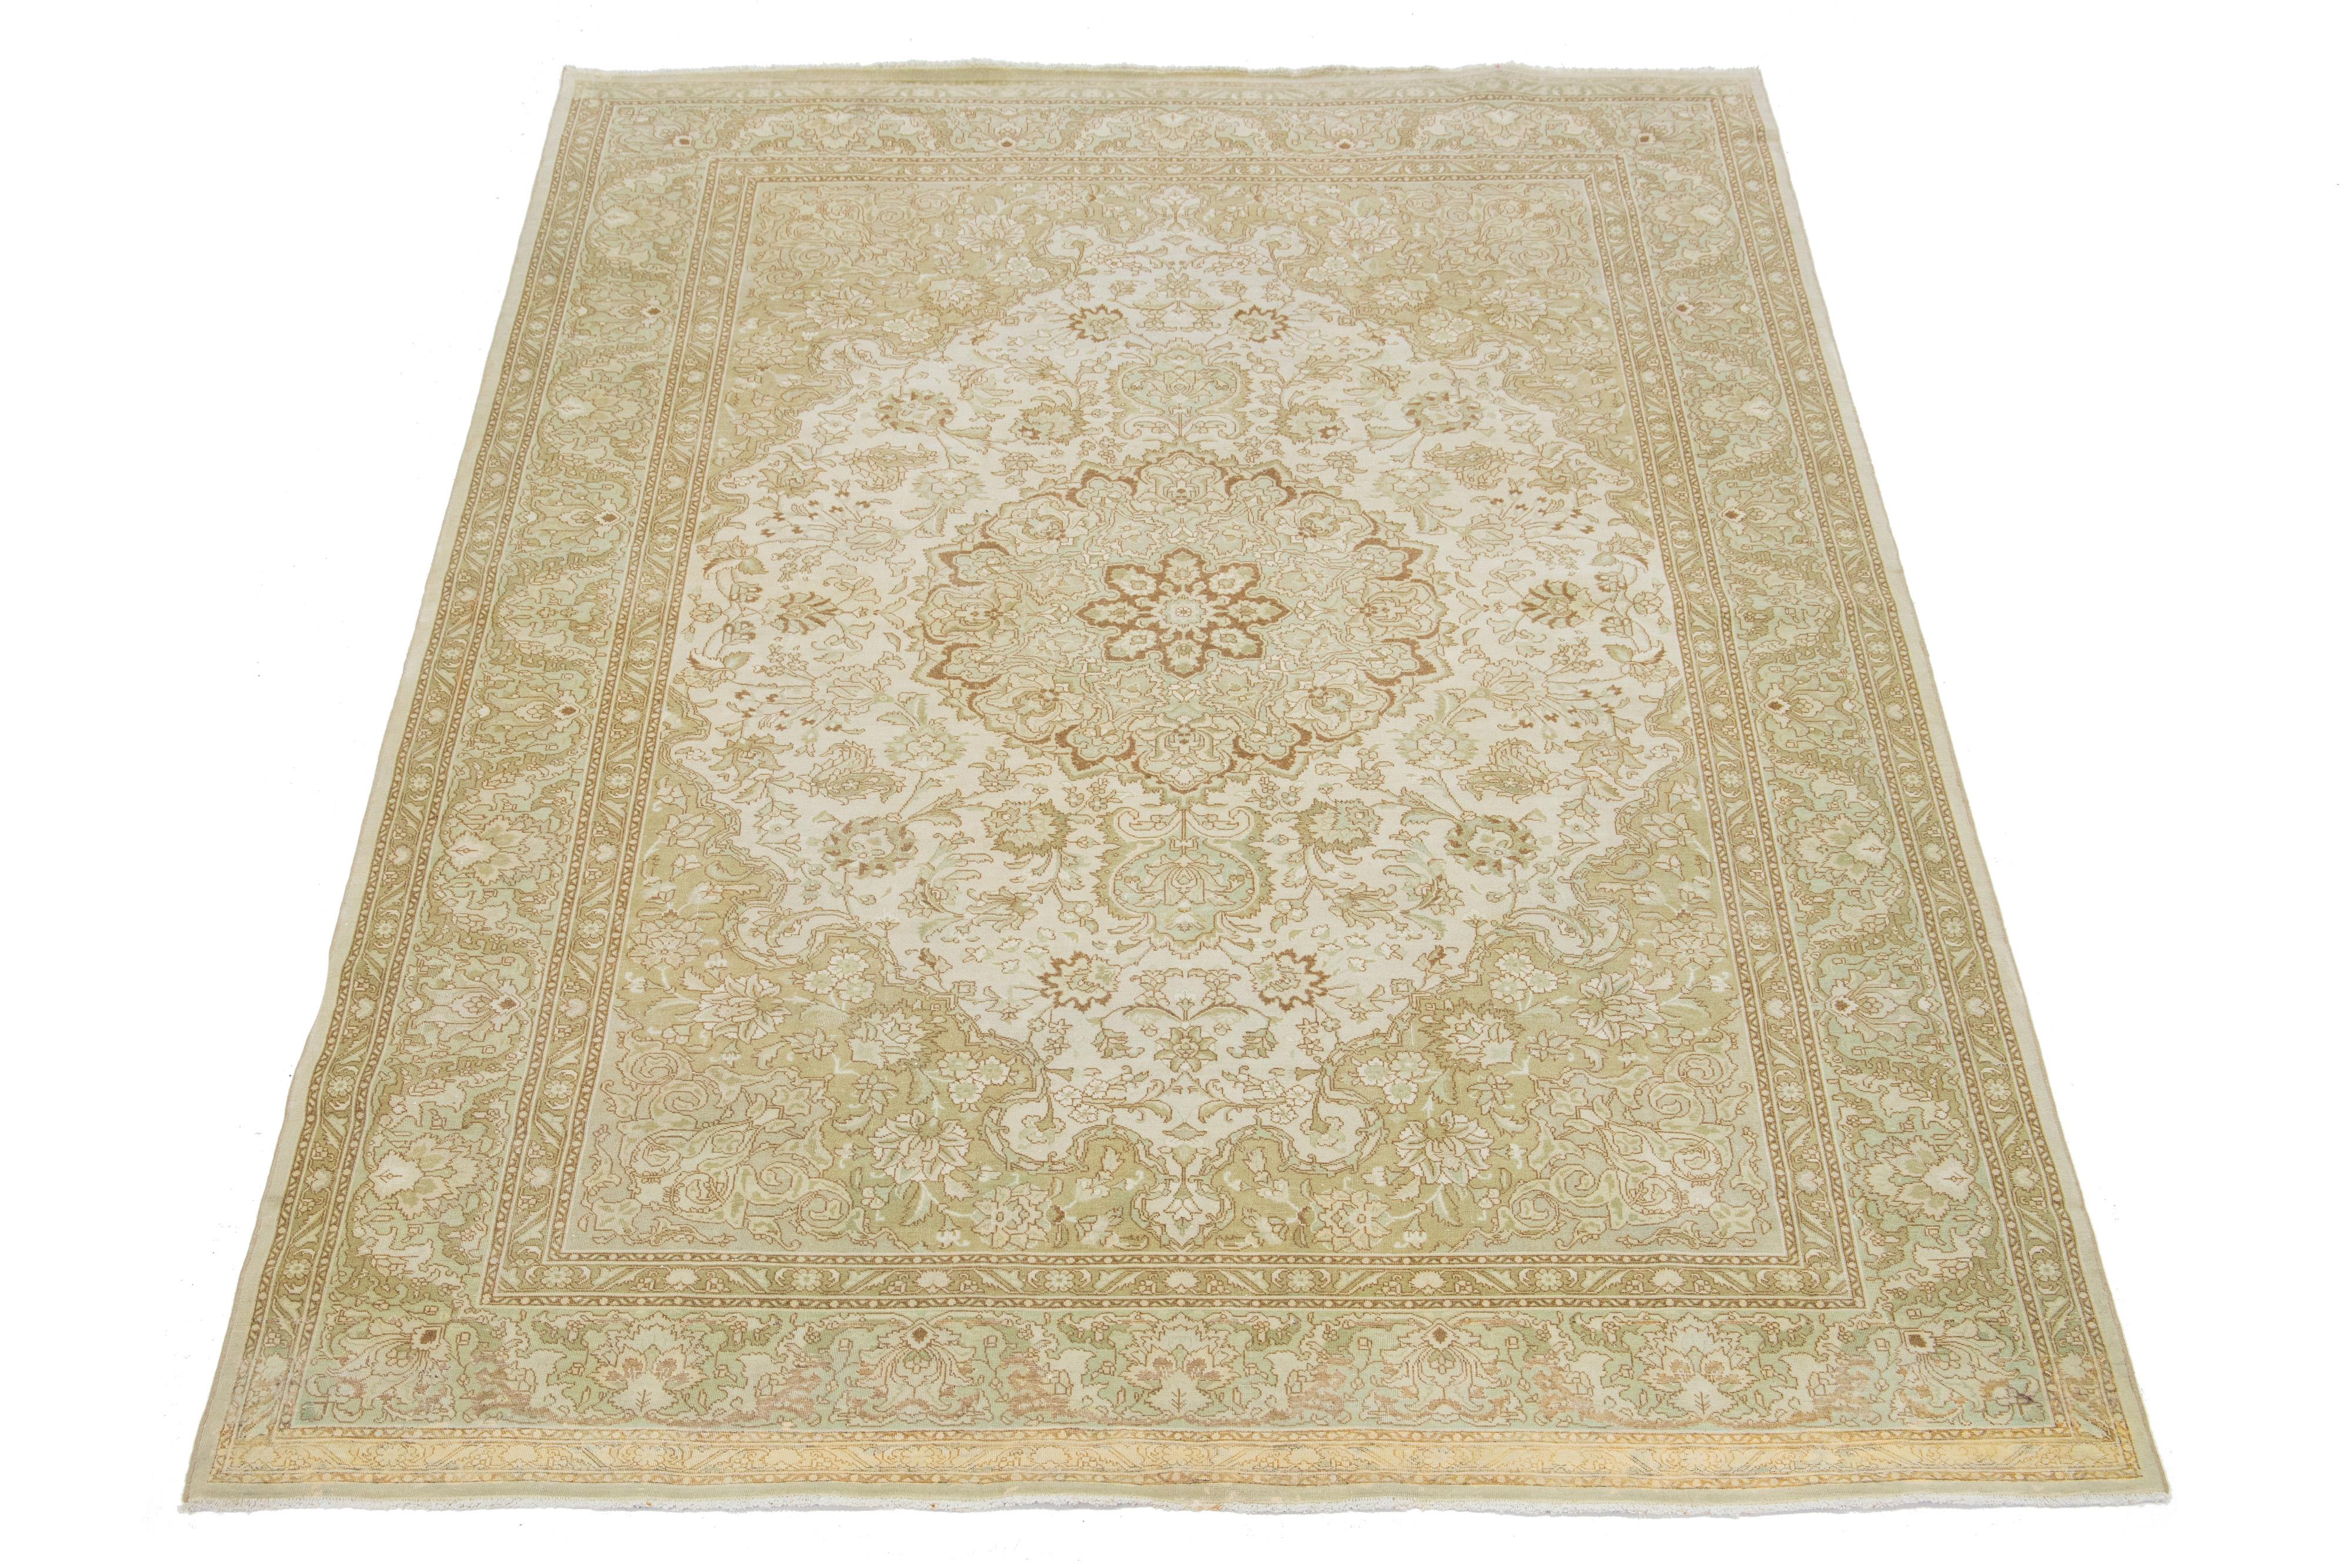 1920s Persian Tabriz wool rug, handcrafted, showcases a traditional floral pattern. The contrast between the beige backdrop and the bold blue and brown emphasizes the design.

This rug measures 6'9